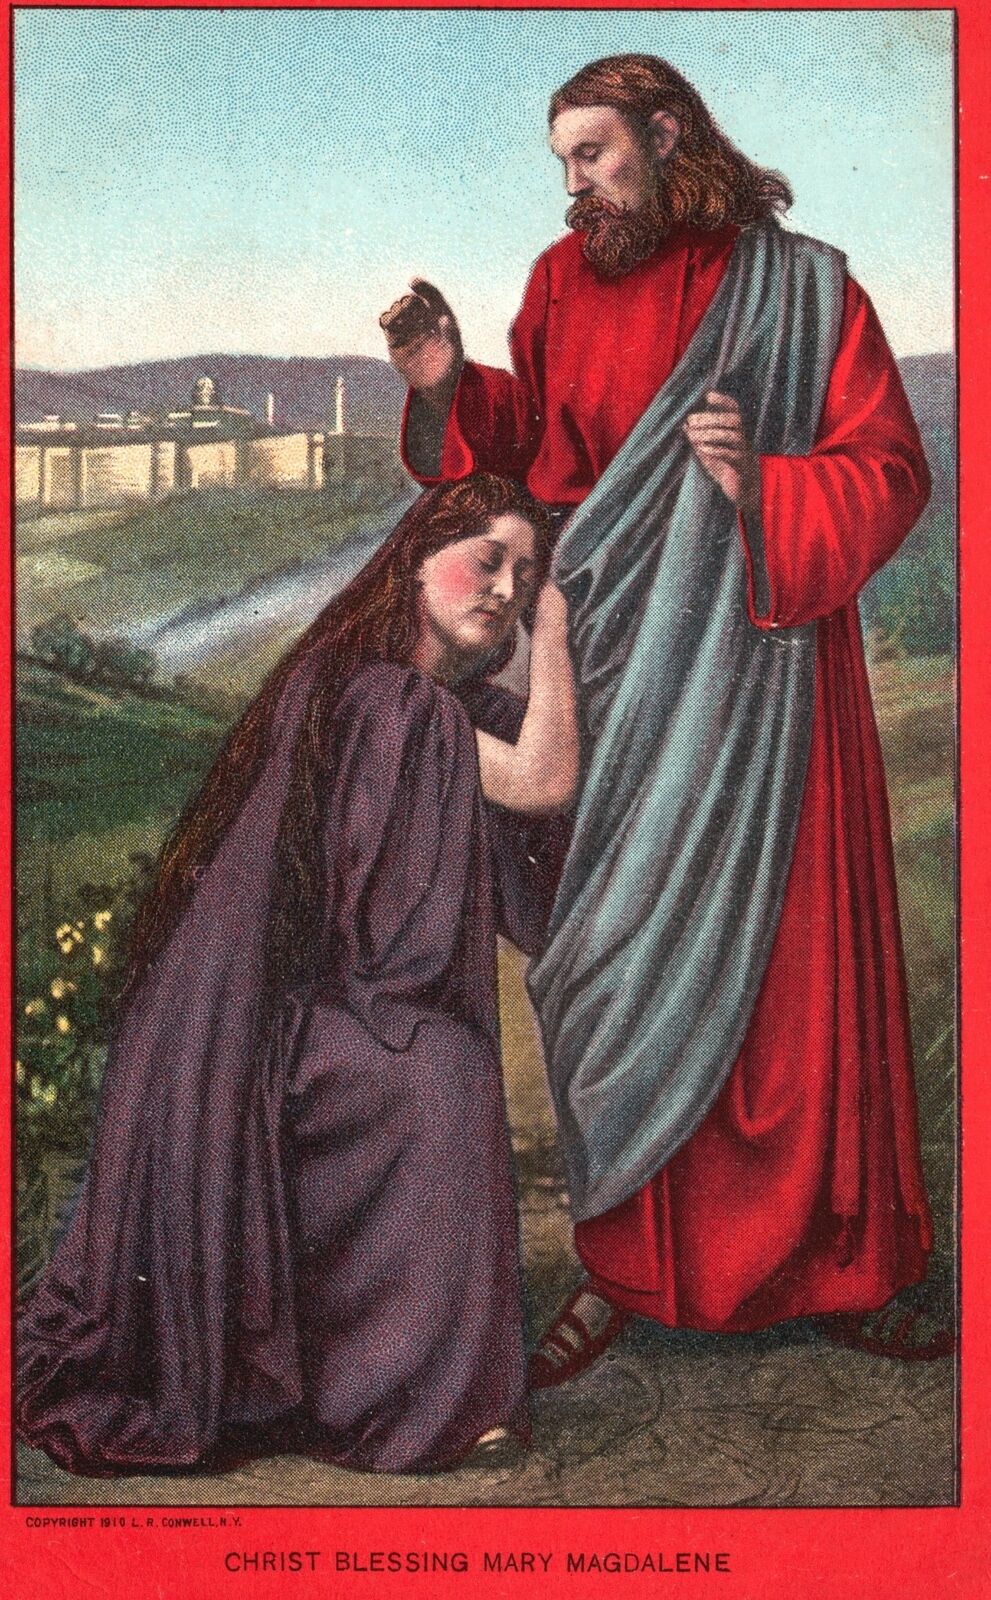 Vintage Postcard 1910s Christ Blessing Mary Magdalene Passion Play Ober-Ammergau